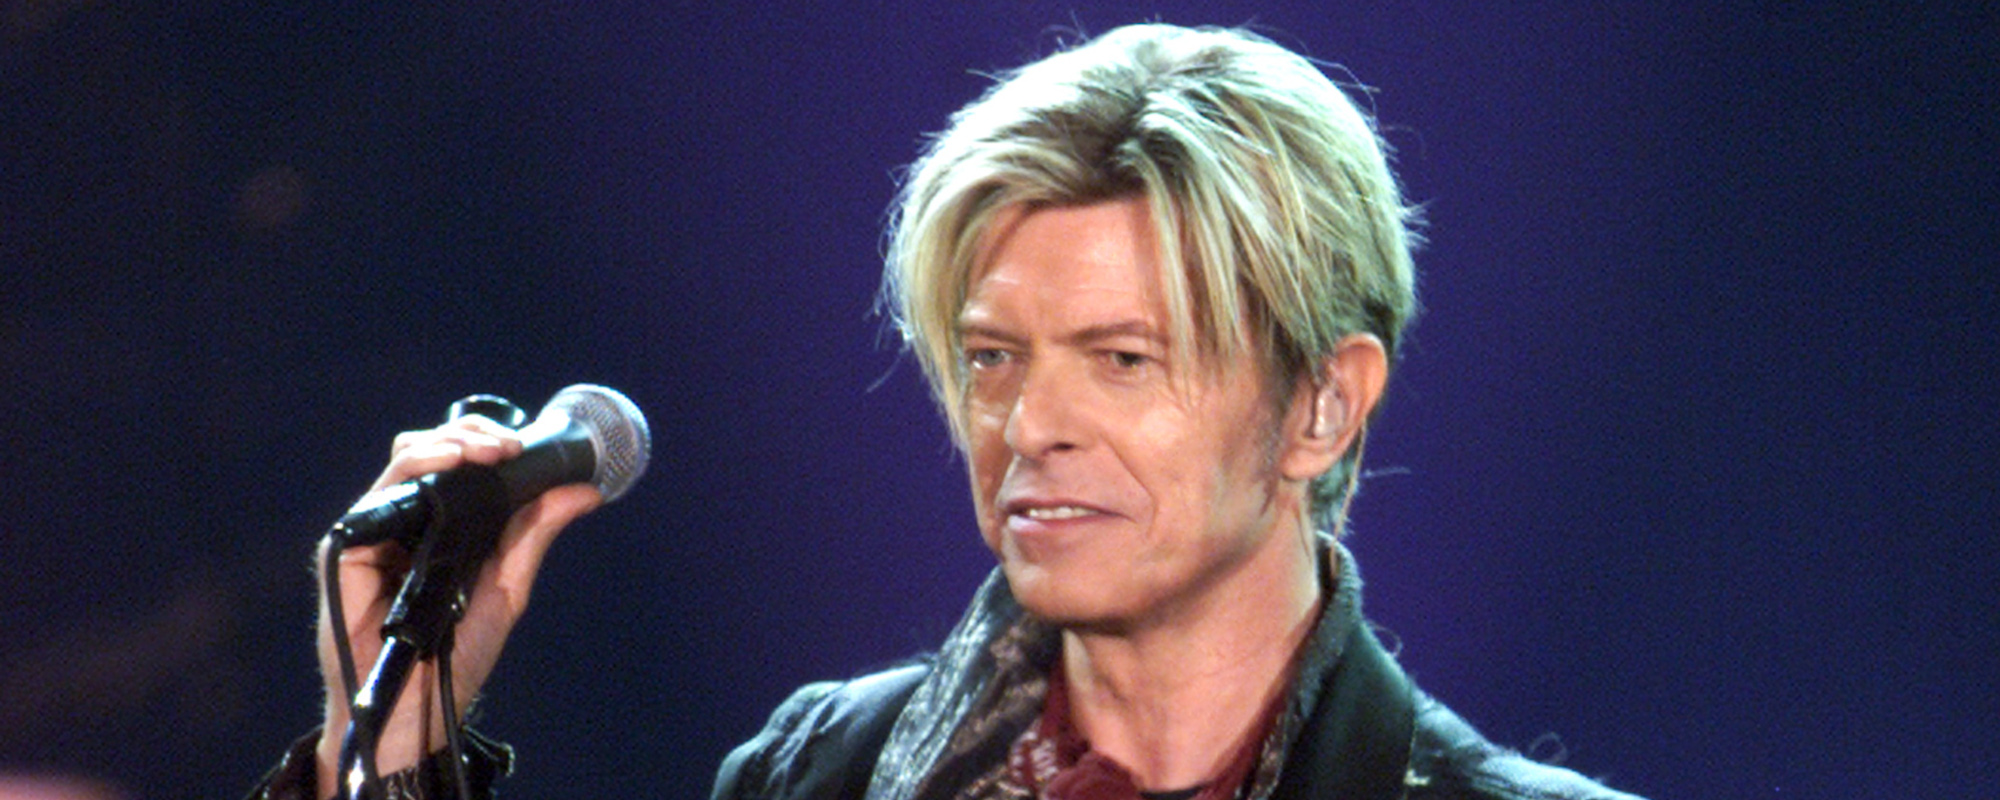 David Bowie Producer, Tony Visconti, Calls Out Spotify’s Low Pay for Artists